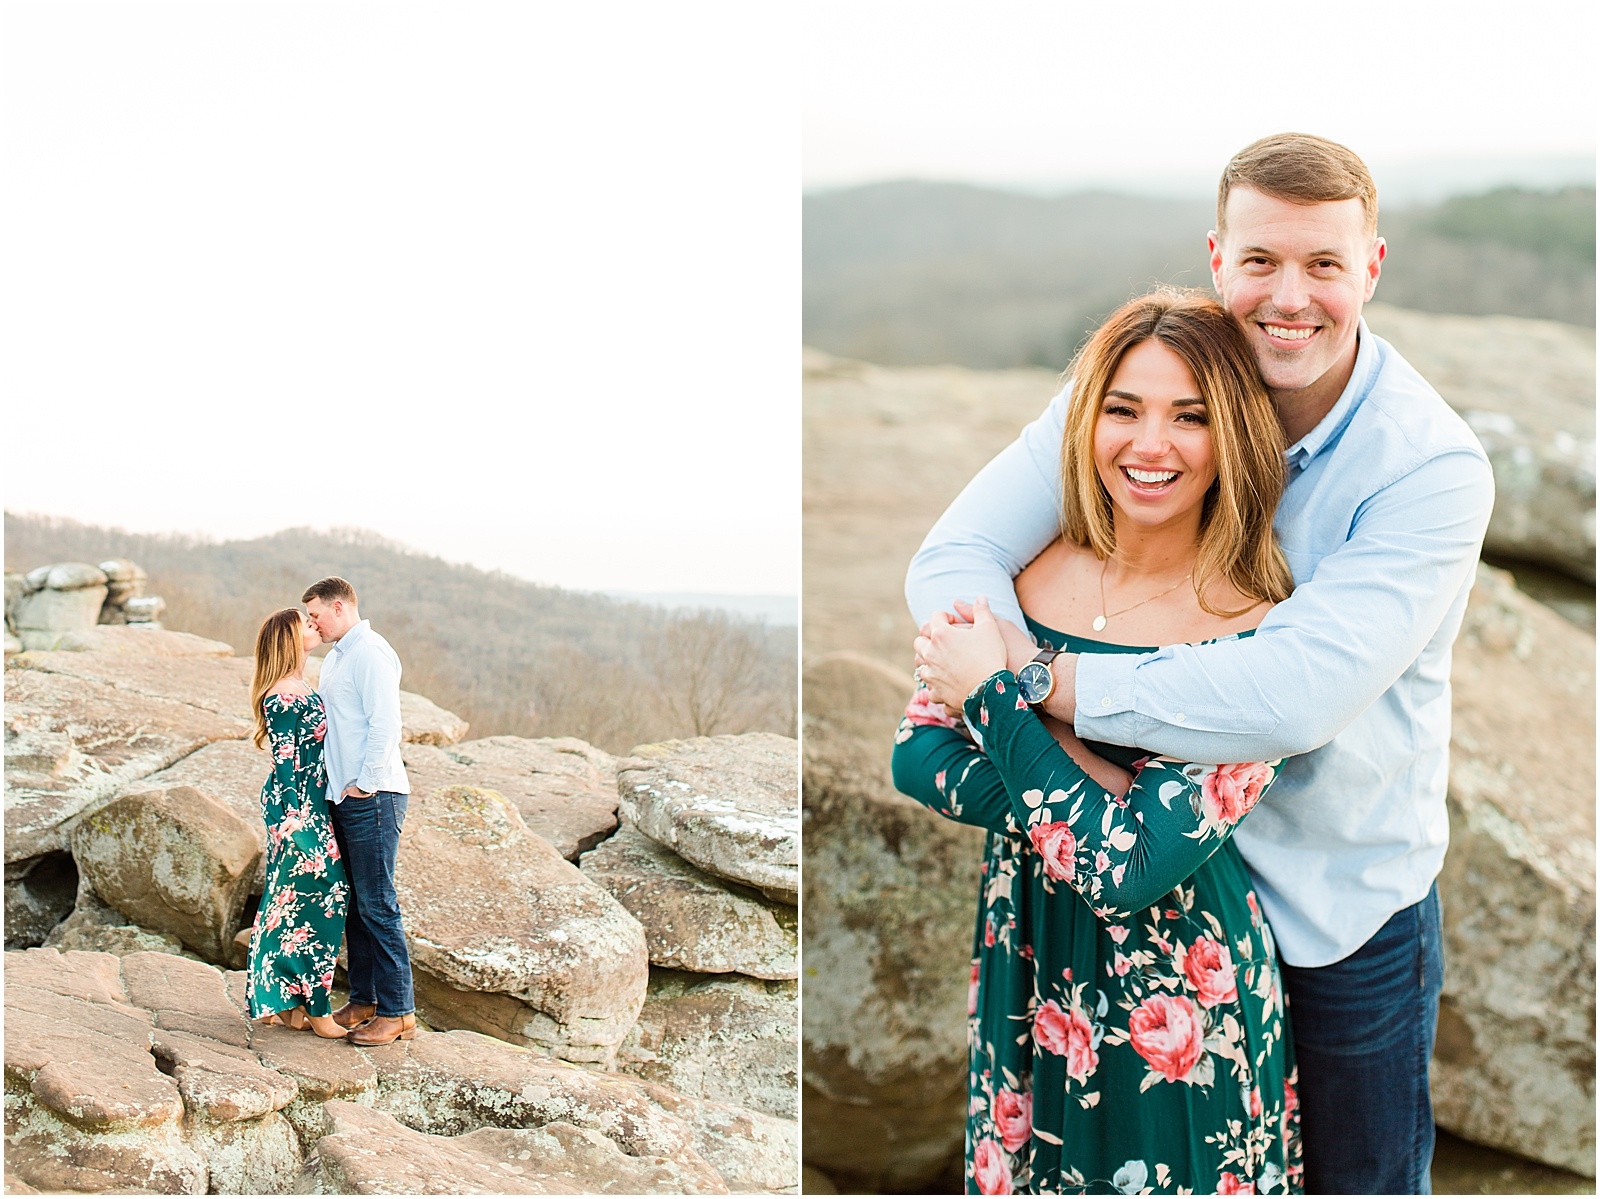 A Sunny Garden of the Gods Engagement Session | Shiloh and Lee | Bret and Brandie Photography086.jpg